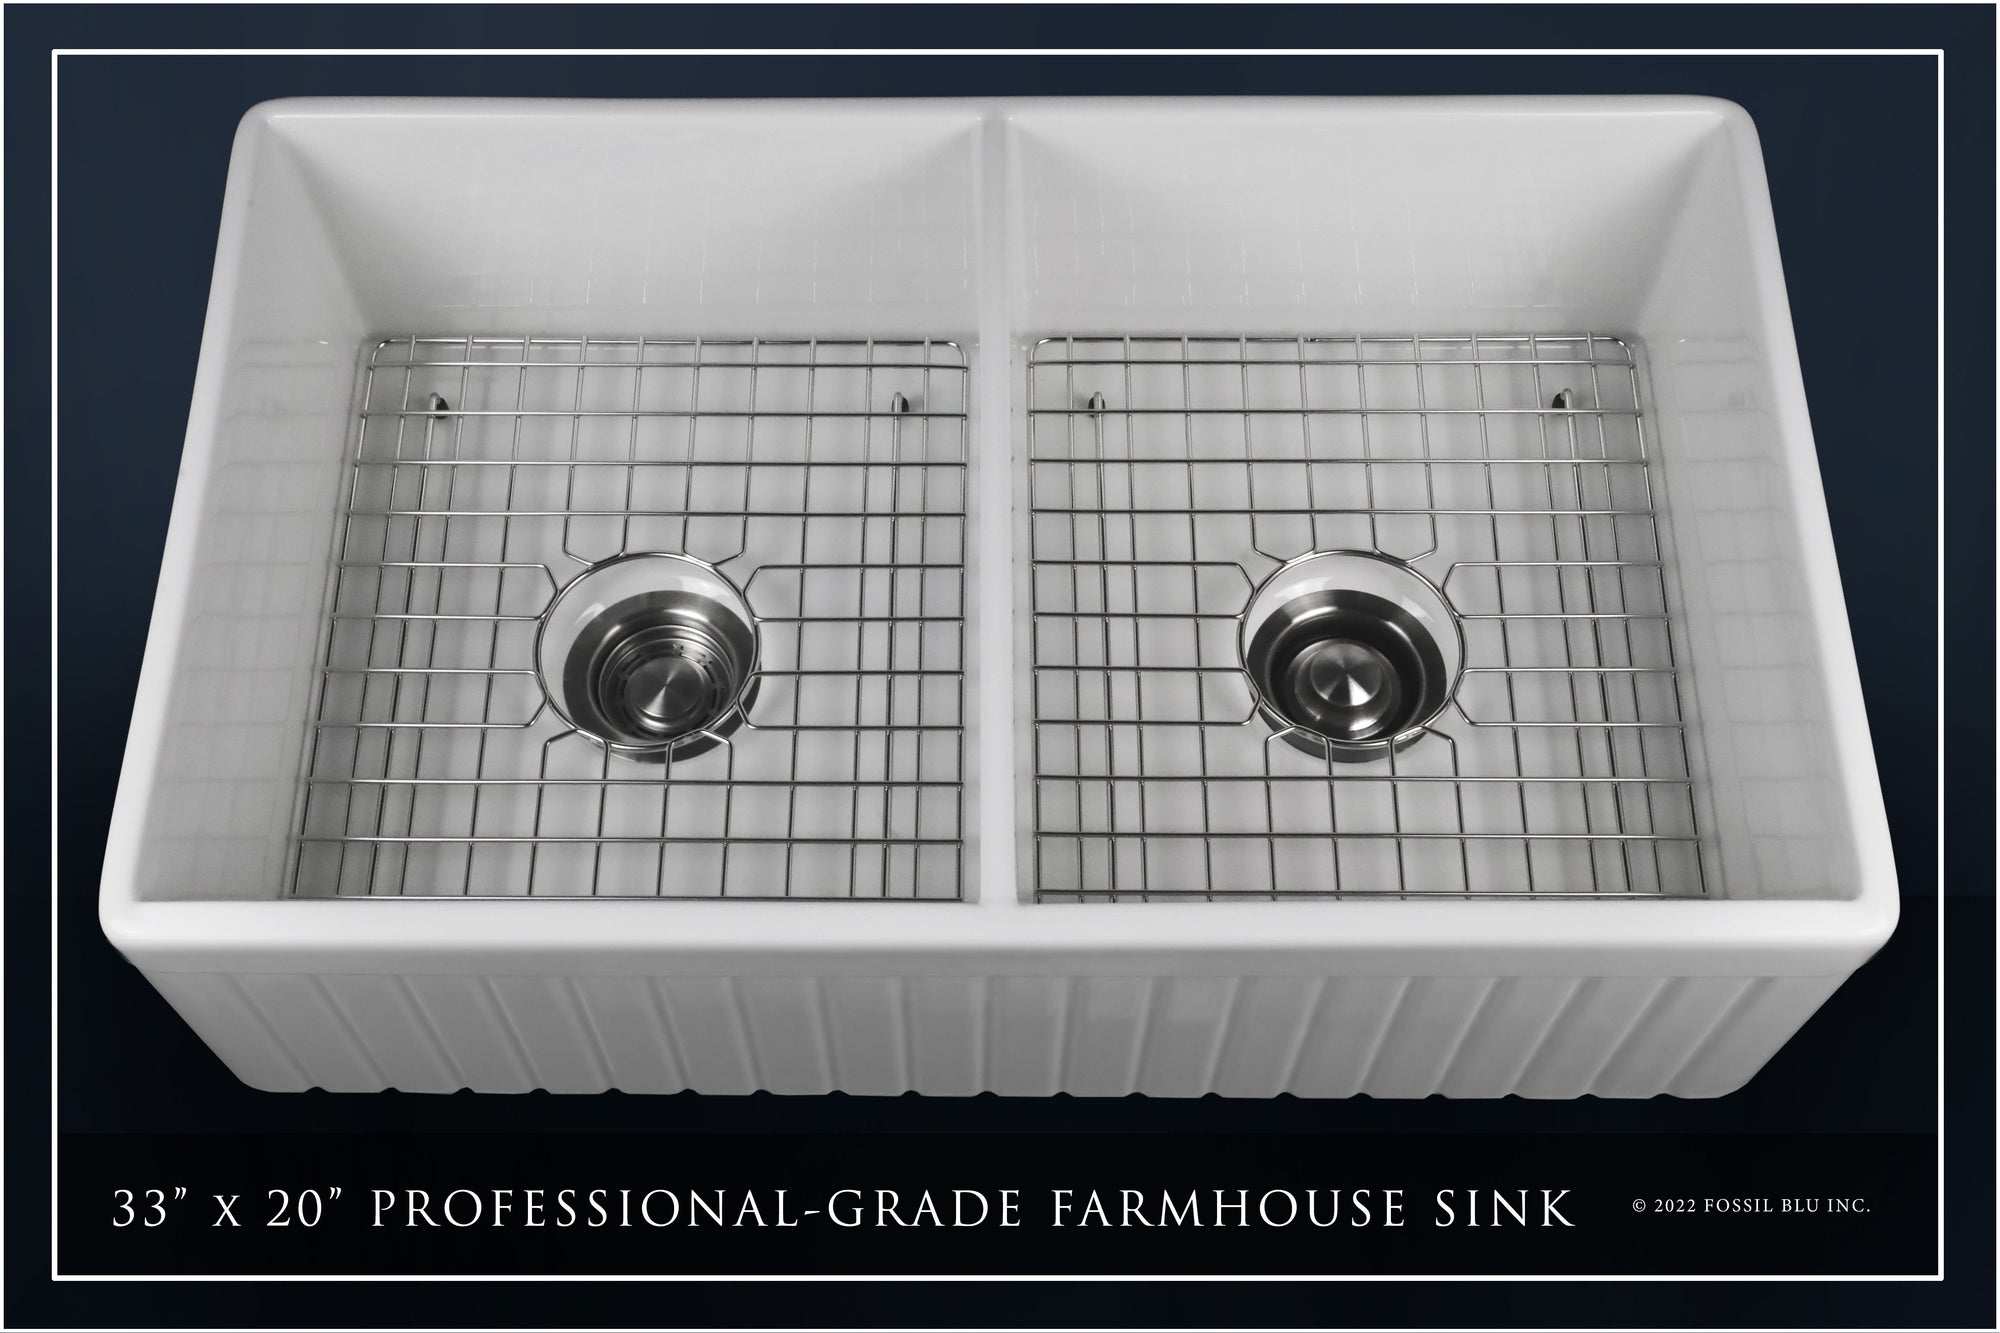 FSW1006 LUXURY 33-INCH SOLID FIRECLAY FARMHOUSE SINK IN WHITE, STAINLESS STEEL ACCS, FLUTED FRONT